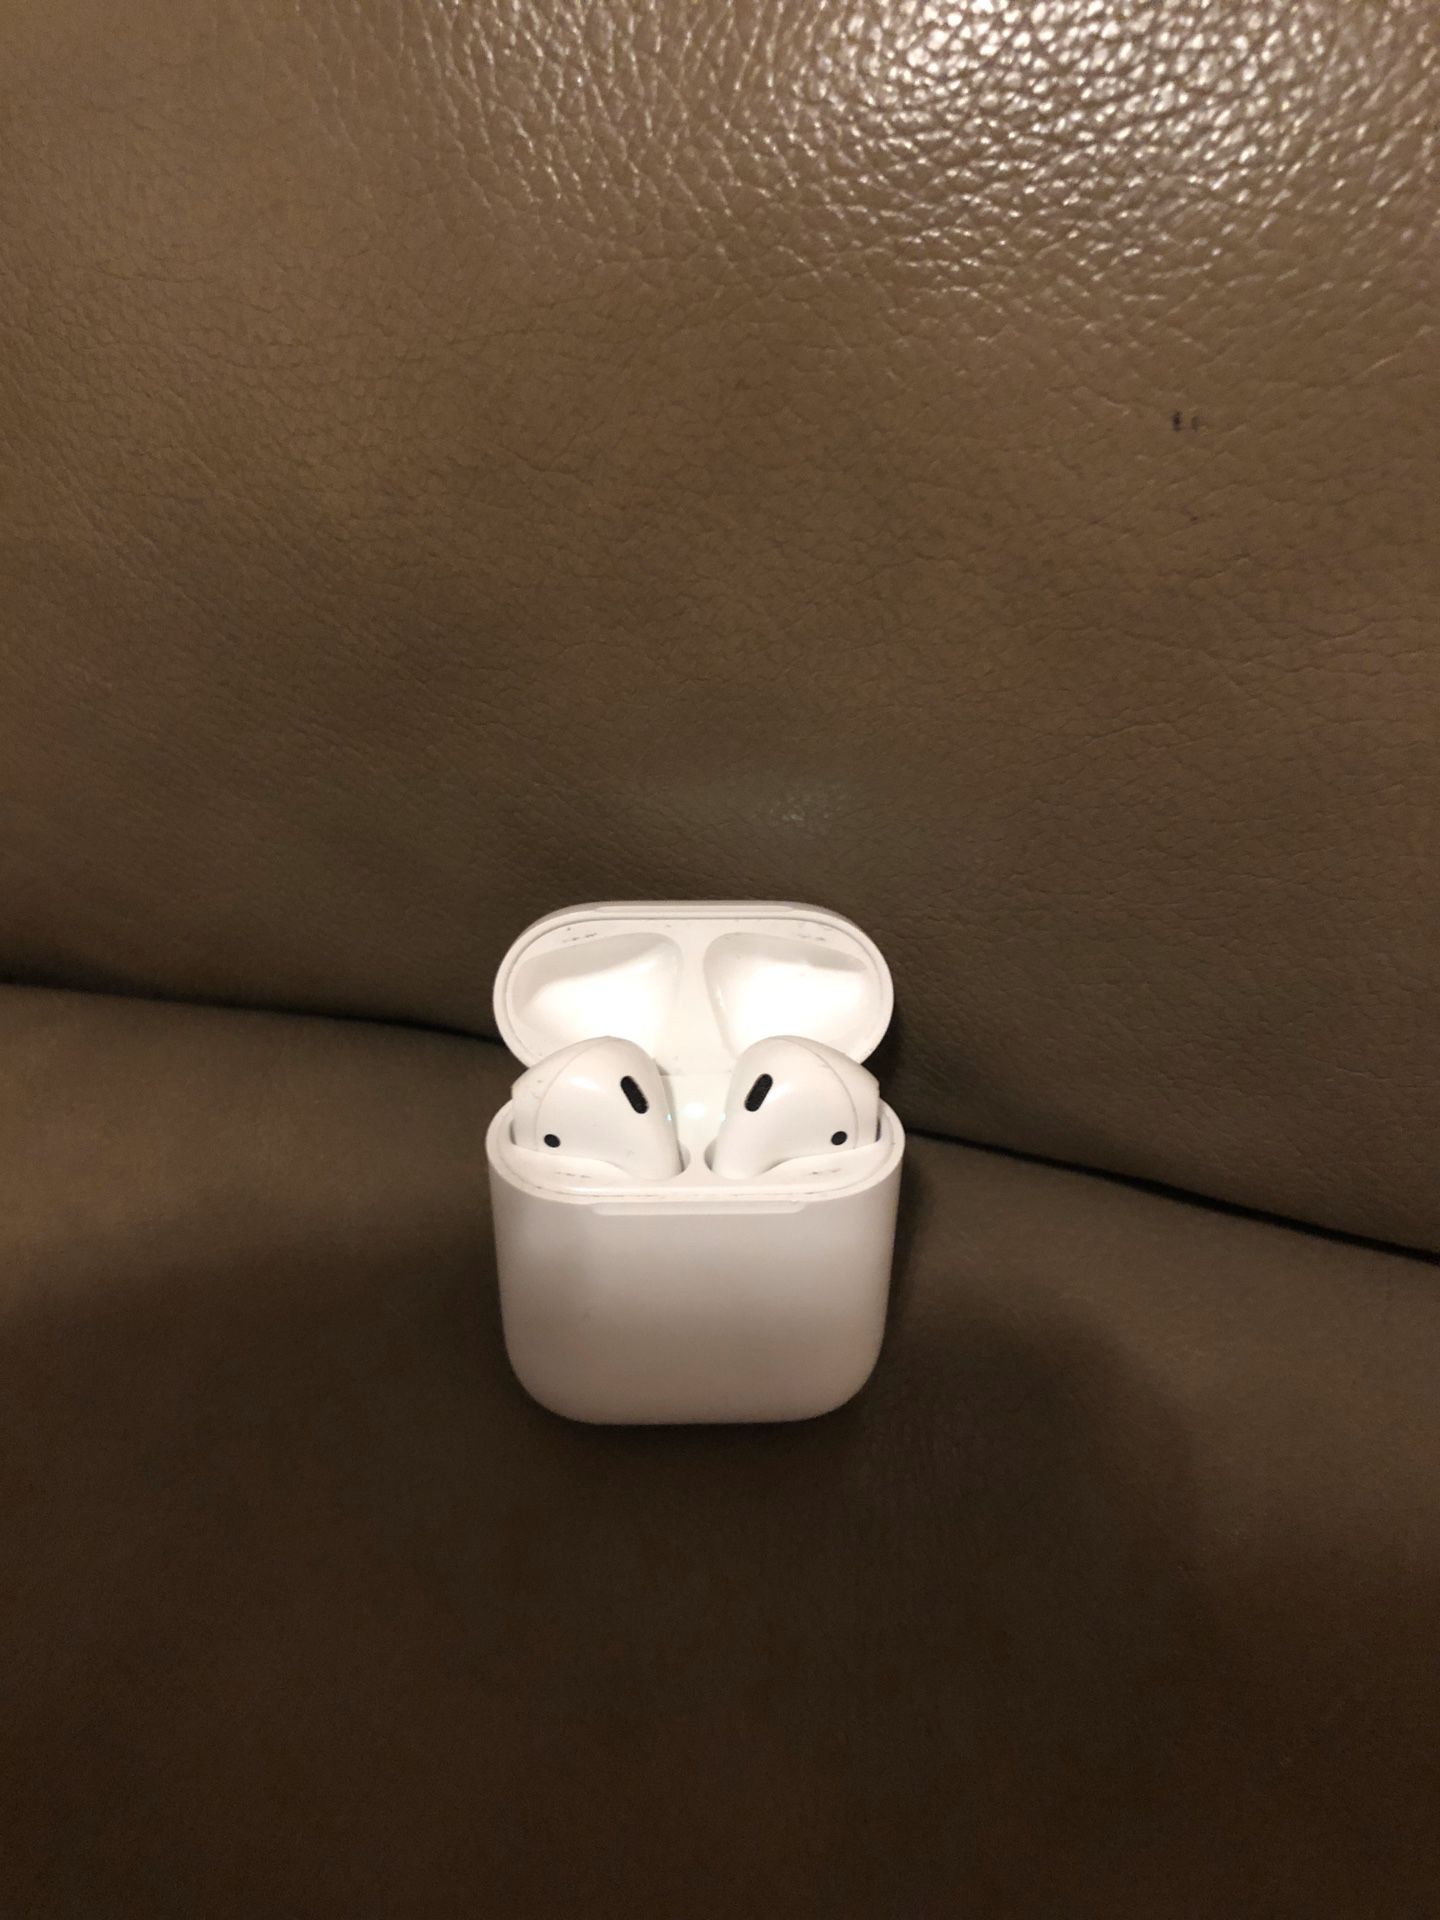 Air pods 1st Generation